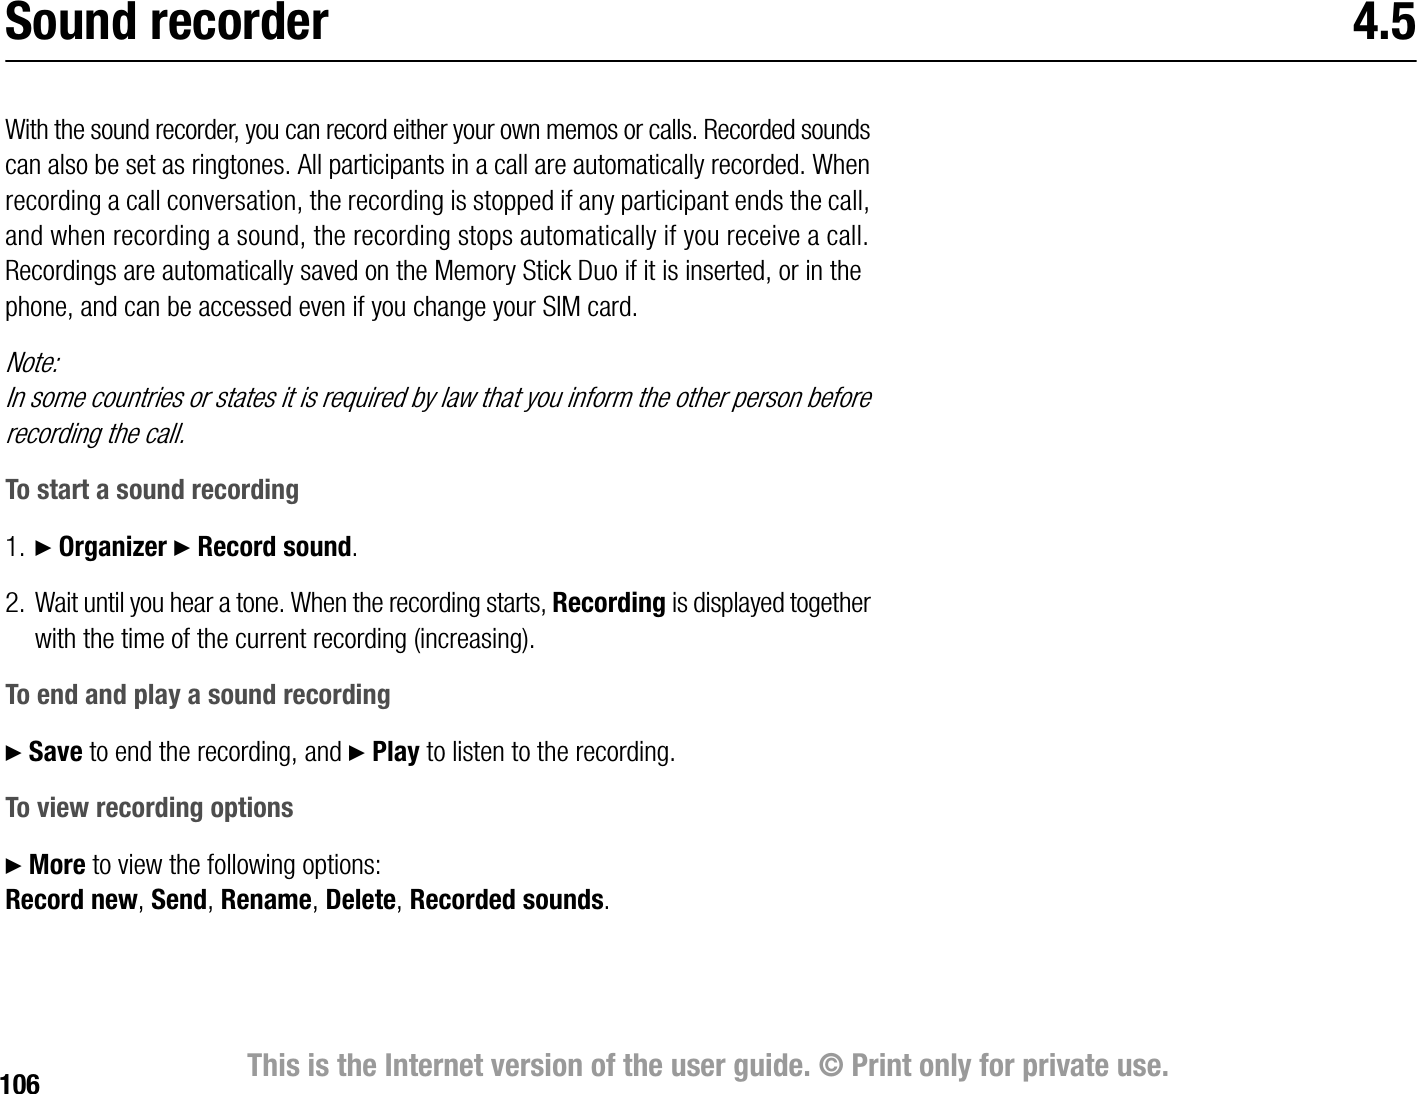 106 This is the Internet version of the user guide. © Print only for private use.Sound recorder 4.5With the sound recorder, you can record either your own memos or calls. Recorded sounds can also be set as ringtones. All participants in a call are automatically recorded. When recording a call conversation, the recording is stopped if any participant ends the call, and when recording a sound, the recording stops automatically if you receive a call. Recordings are automatically saved on the Memory Stick Duo if it is inserted, or in the phone, and can be accessed even if you change your SIM card.Note:In some countries or states it is required by law that you inform the other person before recording the call.To start a sound recording1. } Organizer } Record sound.2. Wait until you hear a tone. When the recording starts, Recording is displayed together with the time of the current recording (increasing).To end and play a sound recording} Save to end the recording, and } Play to listen to the recording.To view recording options} More to view the following options:Record new, Send, Rename, Delete, Recorded sounds.